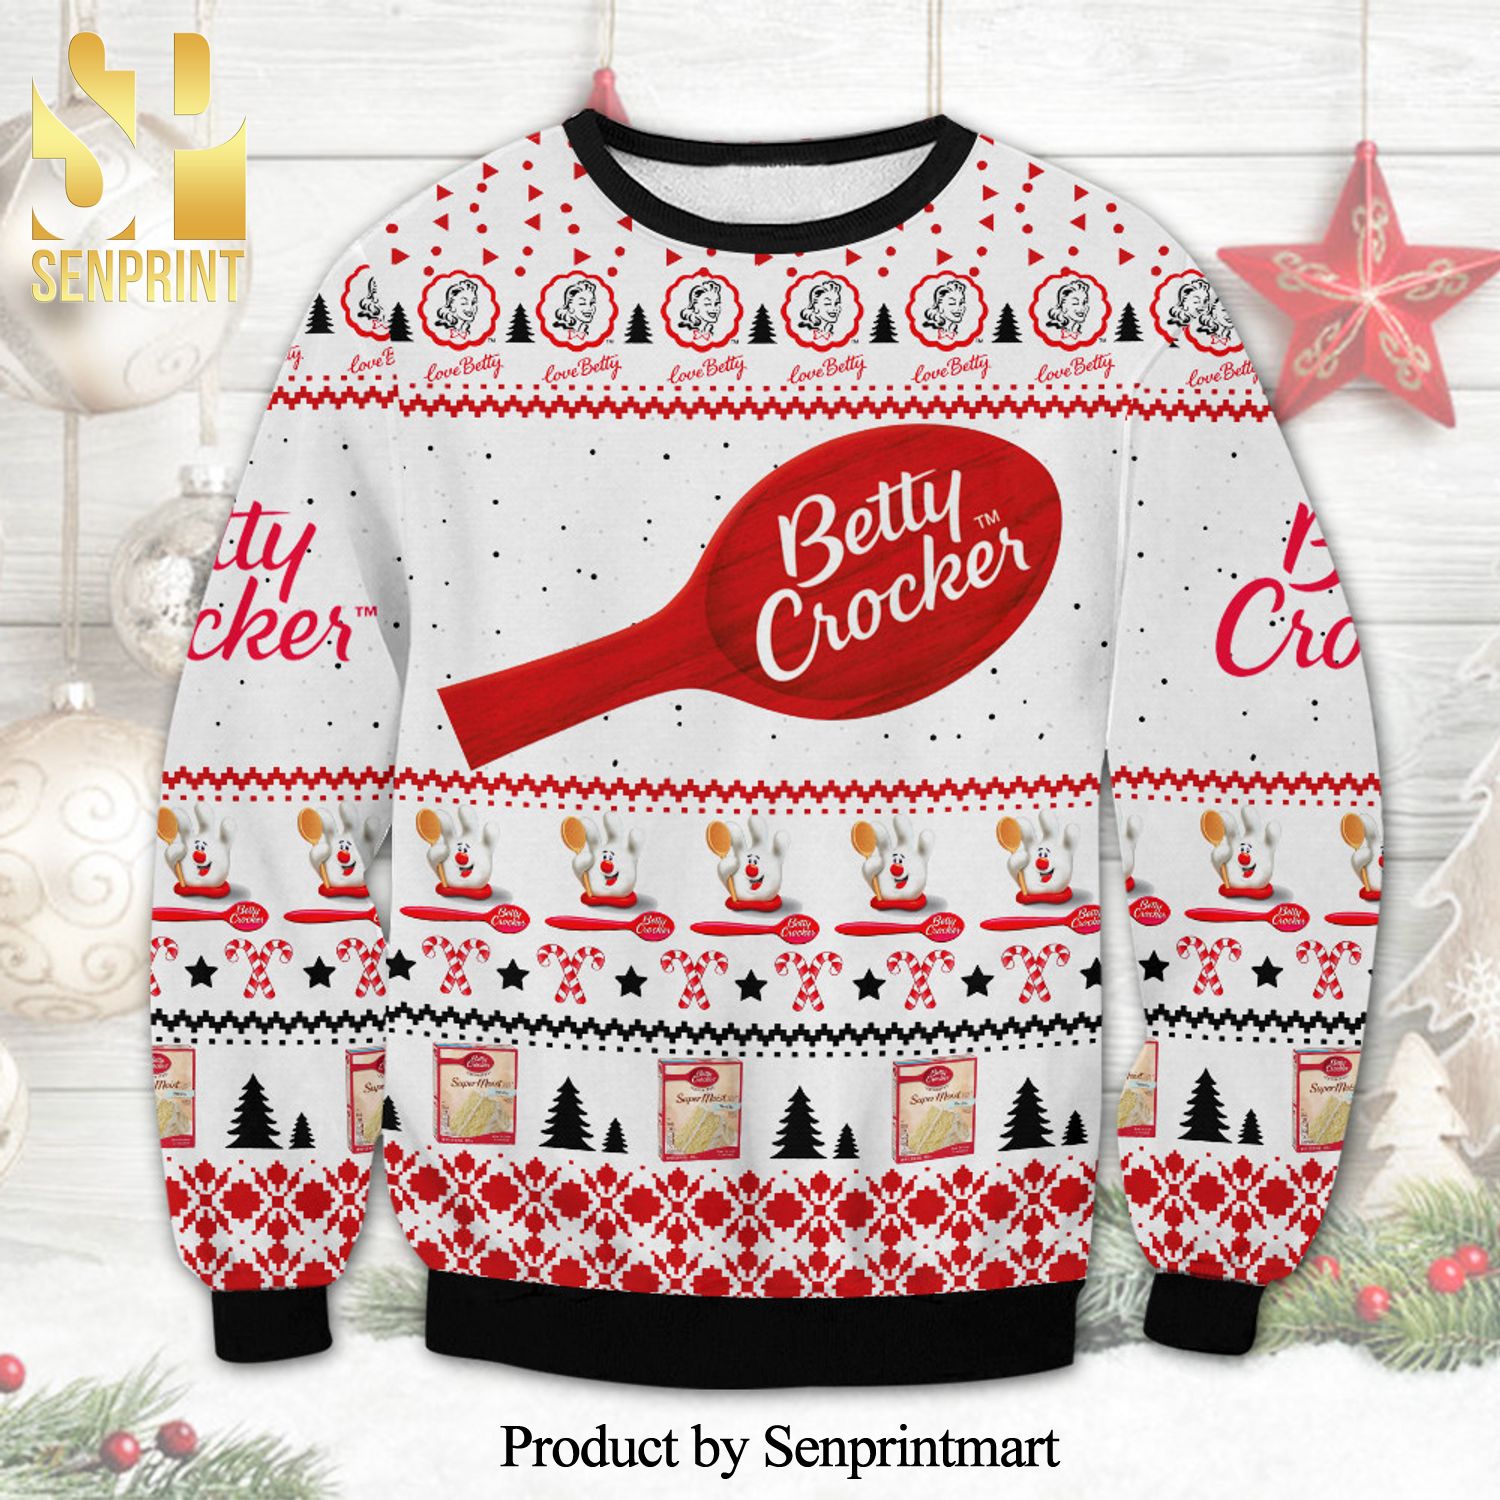 Betty Crocker Baking And Cake Mixes Knitted Ugly Christmas Sweater